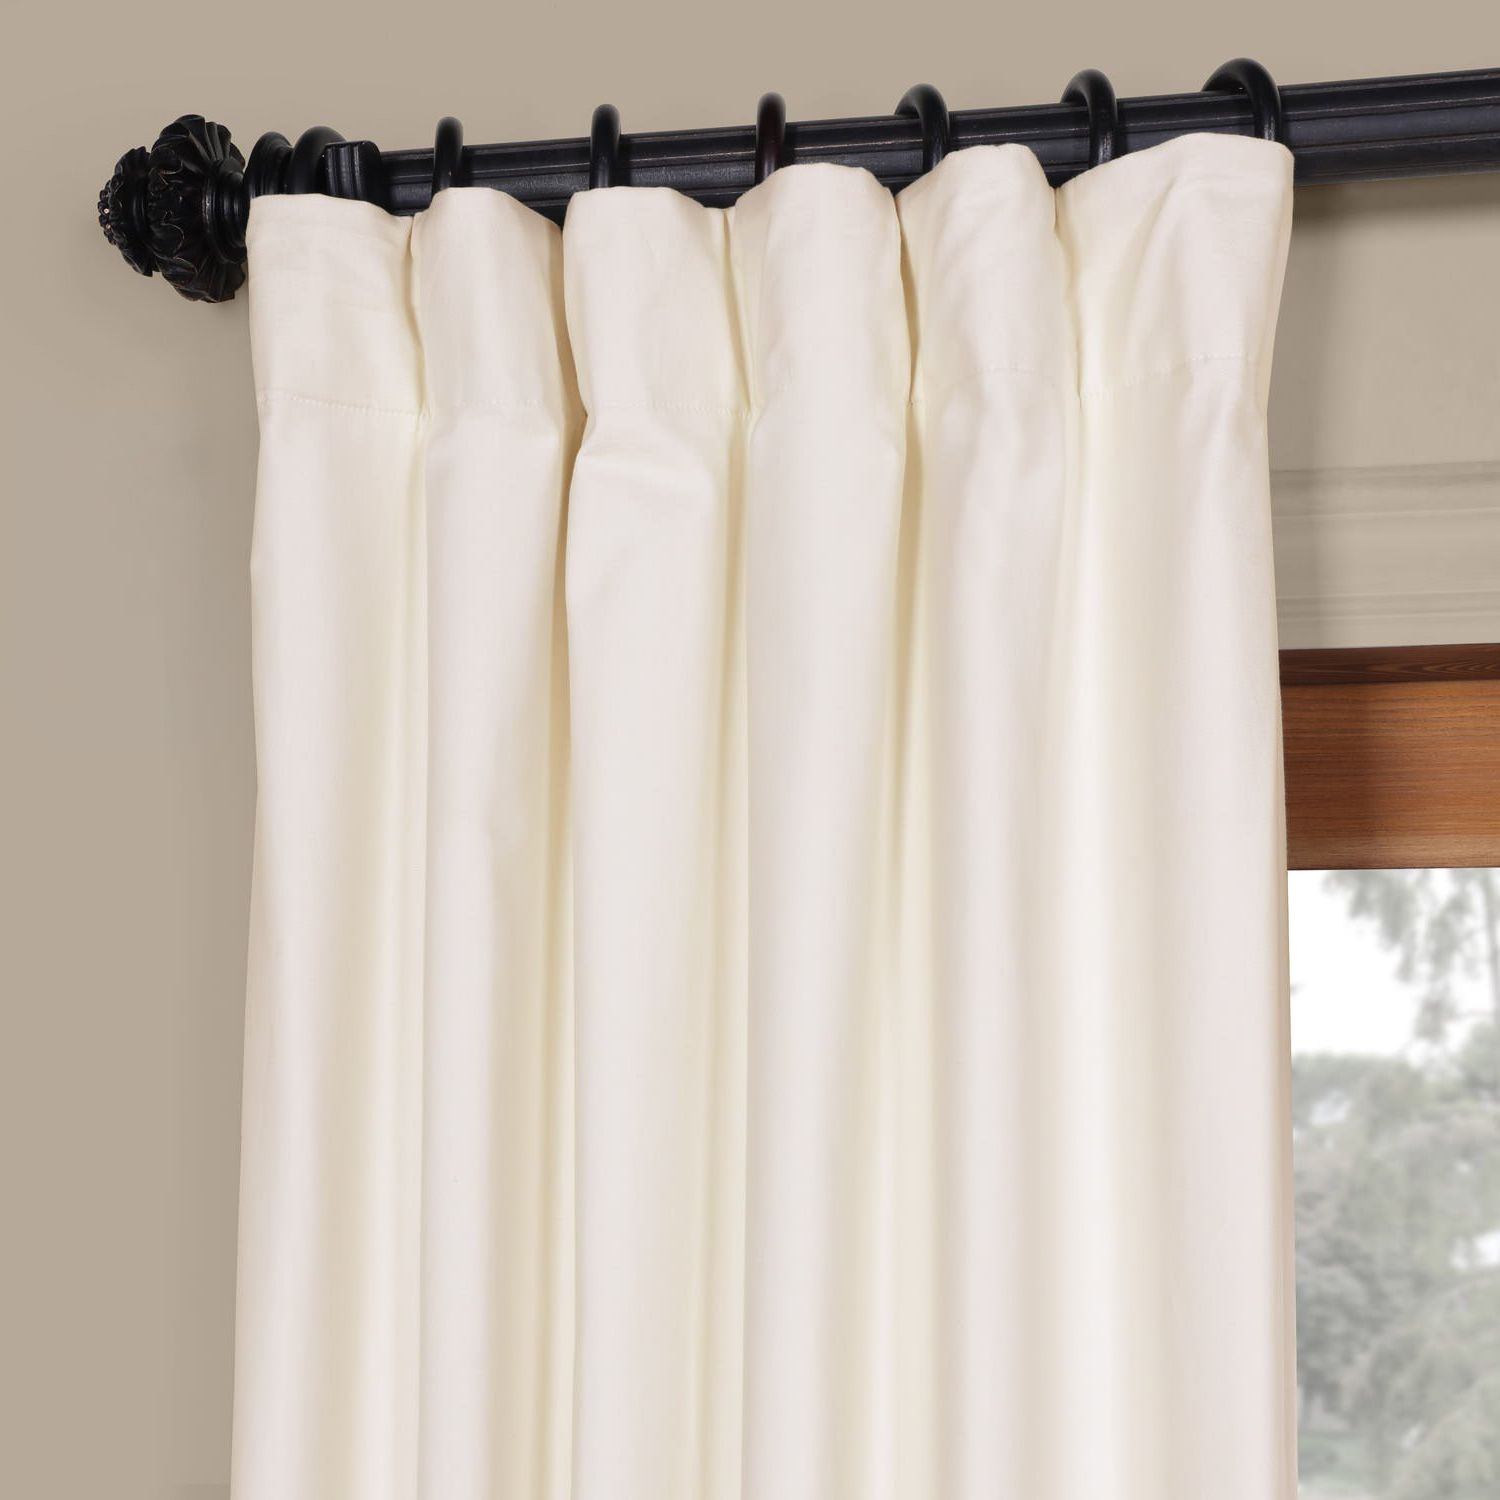 Recent Solid Cotton True Blackout Curtain Panels With Regard To Prct Bo01b 96 Solid Cotton Blackout Curtain, 50 X 96, Fresh Popcorn (View 8 of 20)